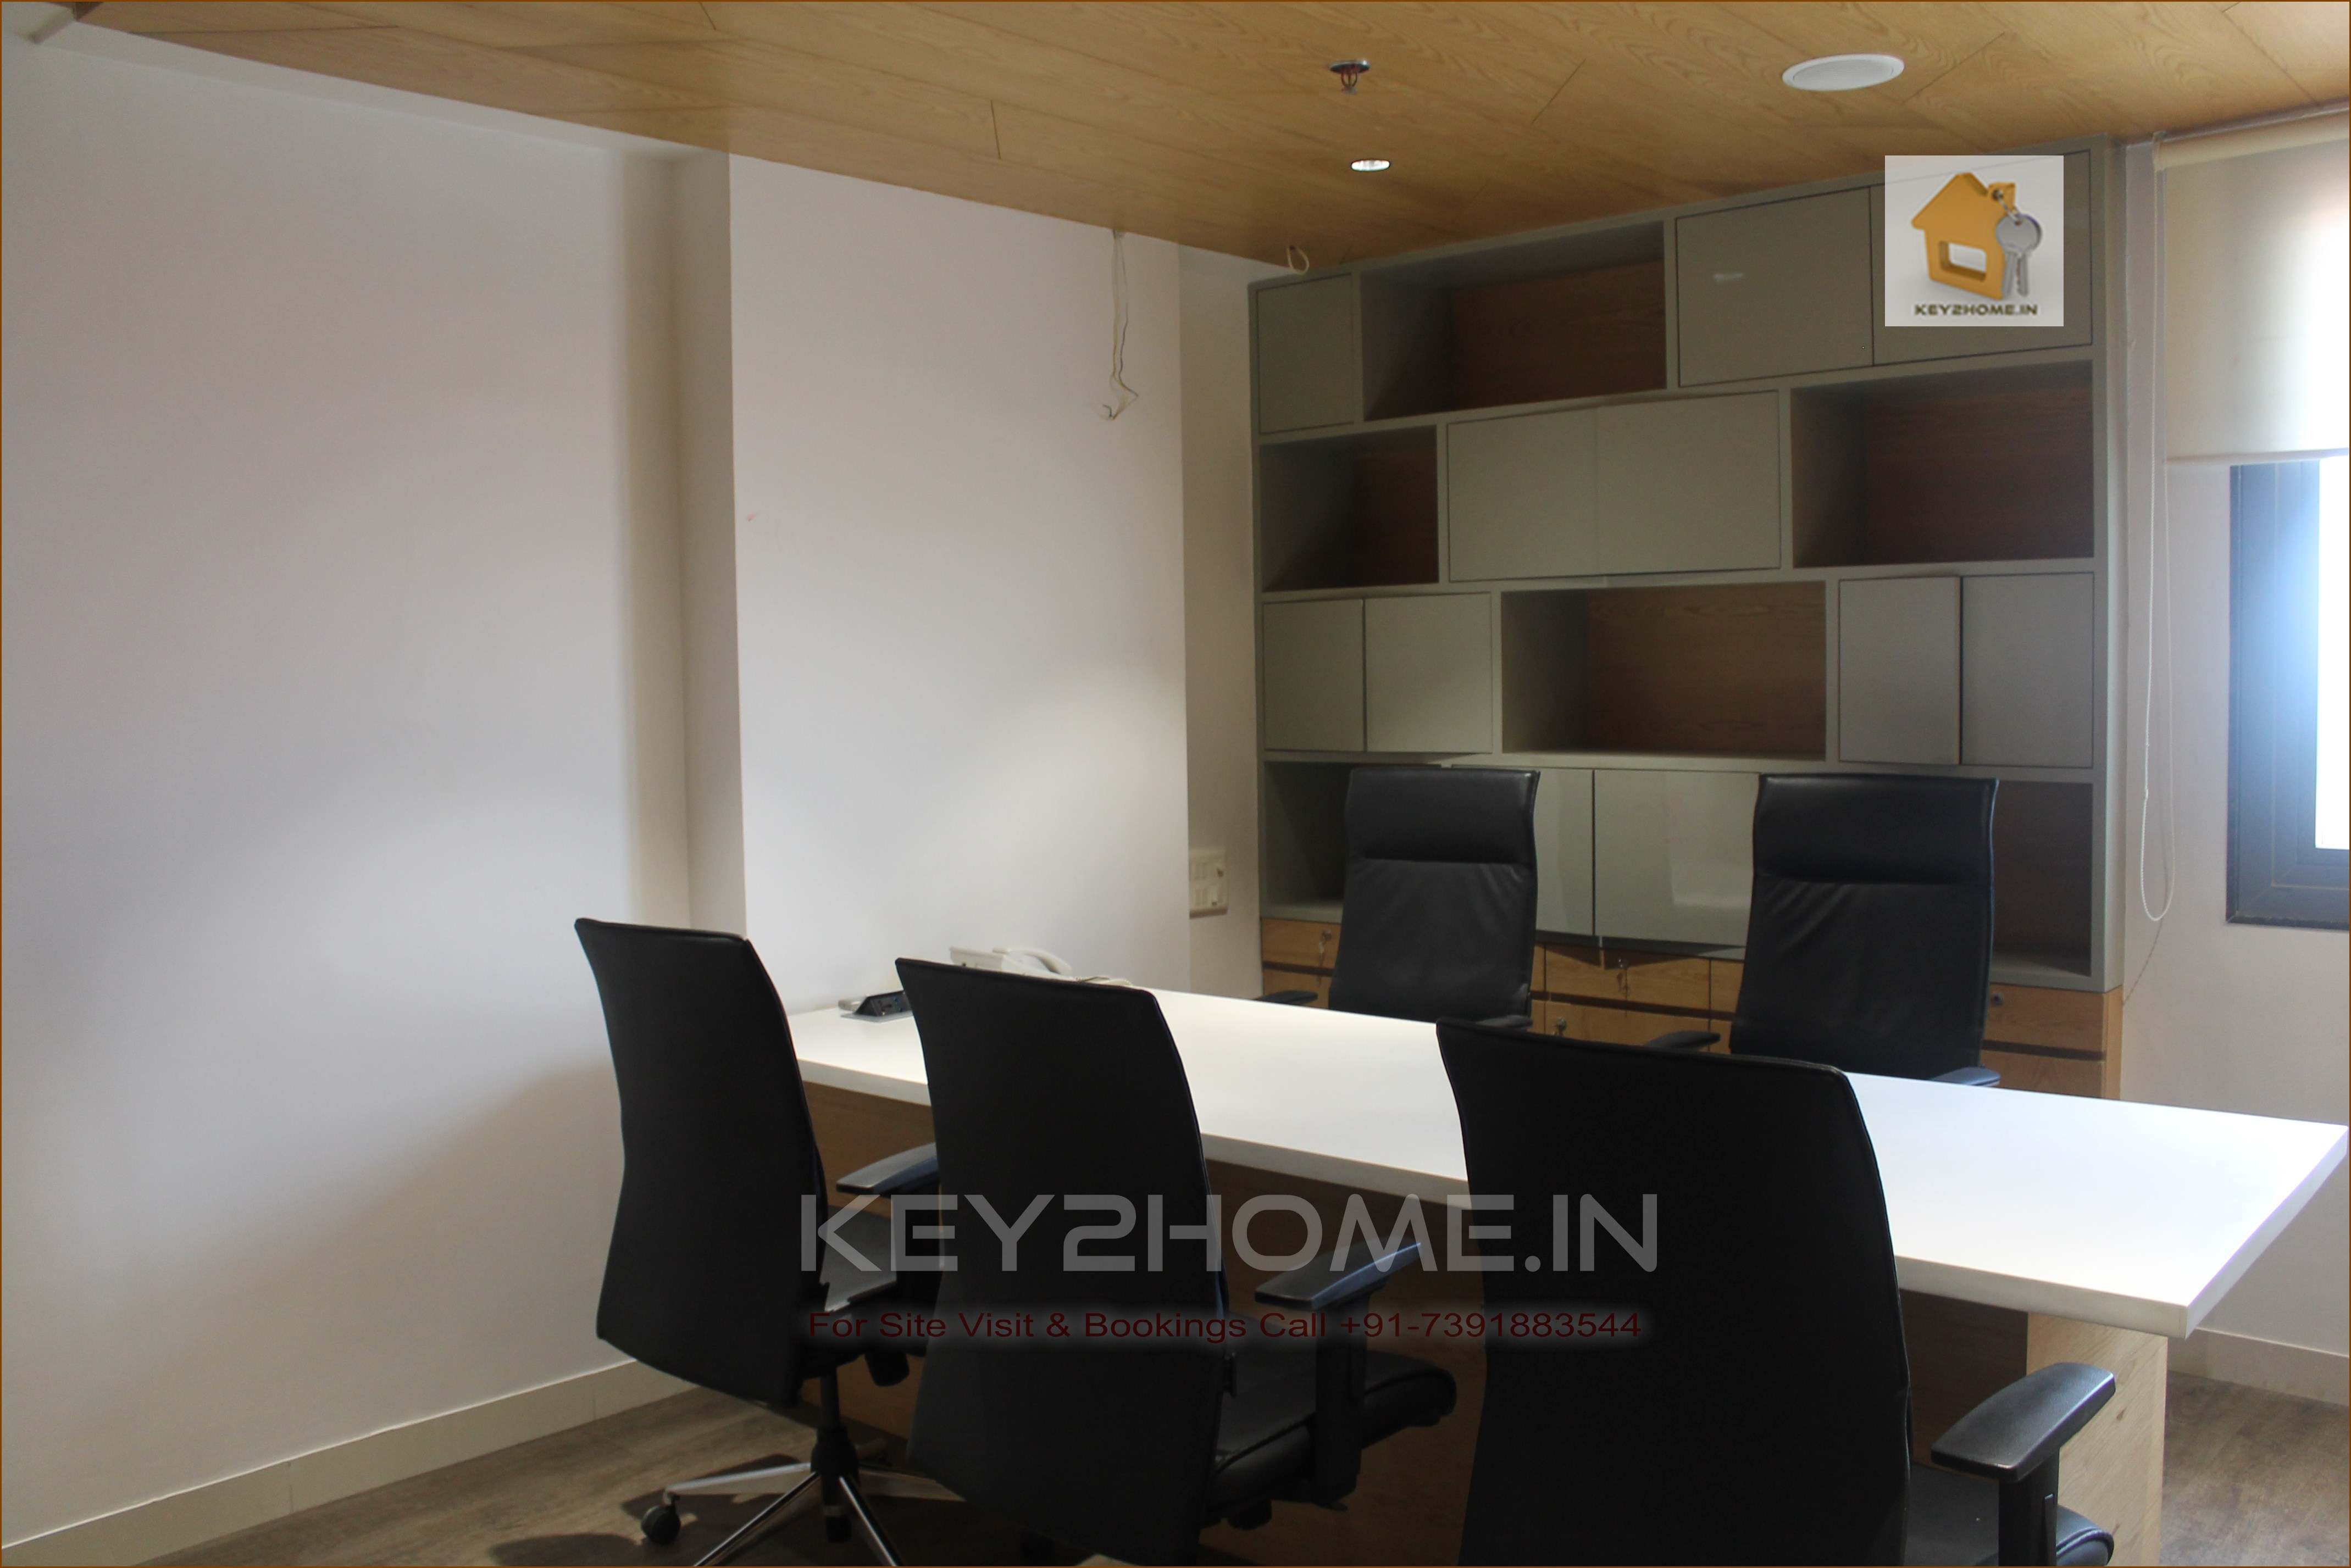 Commercial Office space on rent in Hinjewadi near wakad bridge Manager cabin large space 3